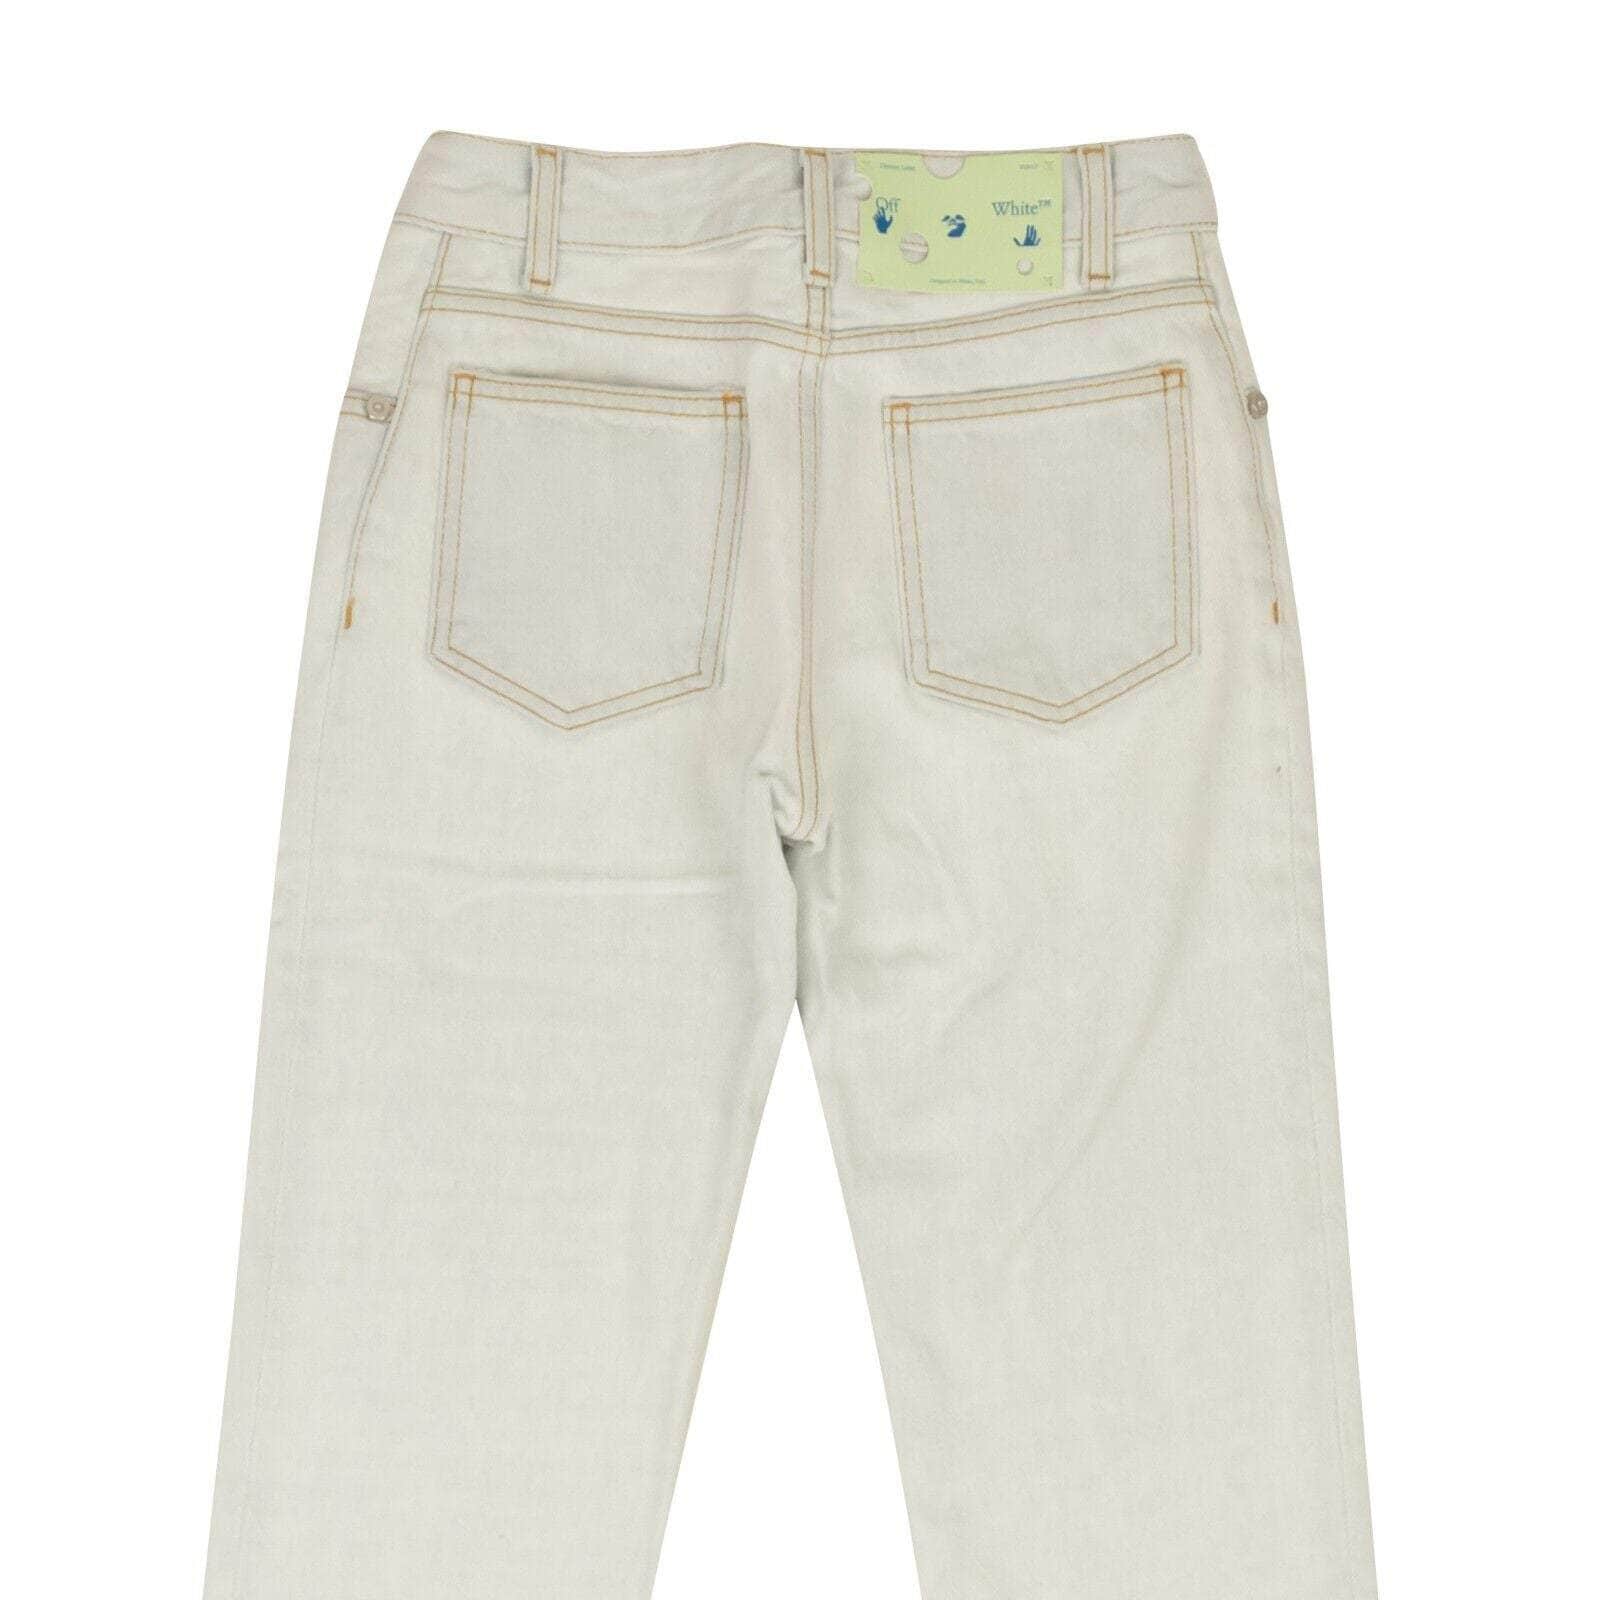 Off-White c/o Virgil Abloh channelenable-all, chicmi, couponcollection, gender-womens, main-clothing, off-white-c-o-virgil-abloh, size-25, size-26, size-27, under-250, womens-cropped-jeans Light Blue Cropped Leg Jeans